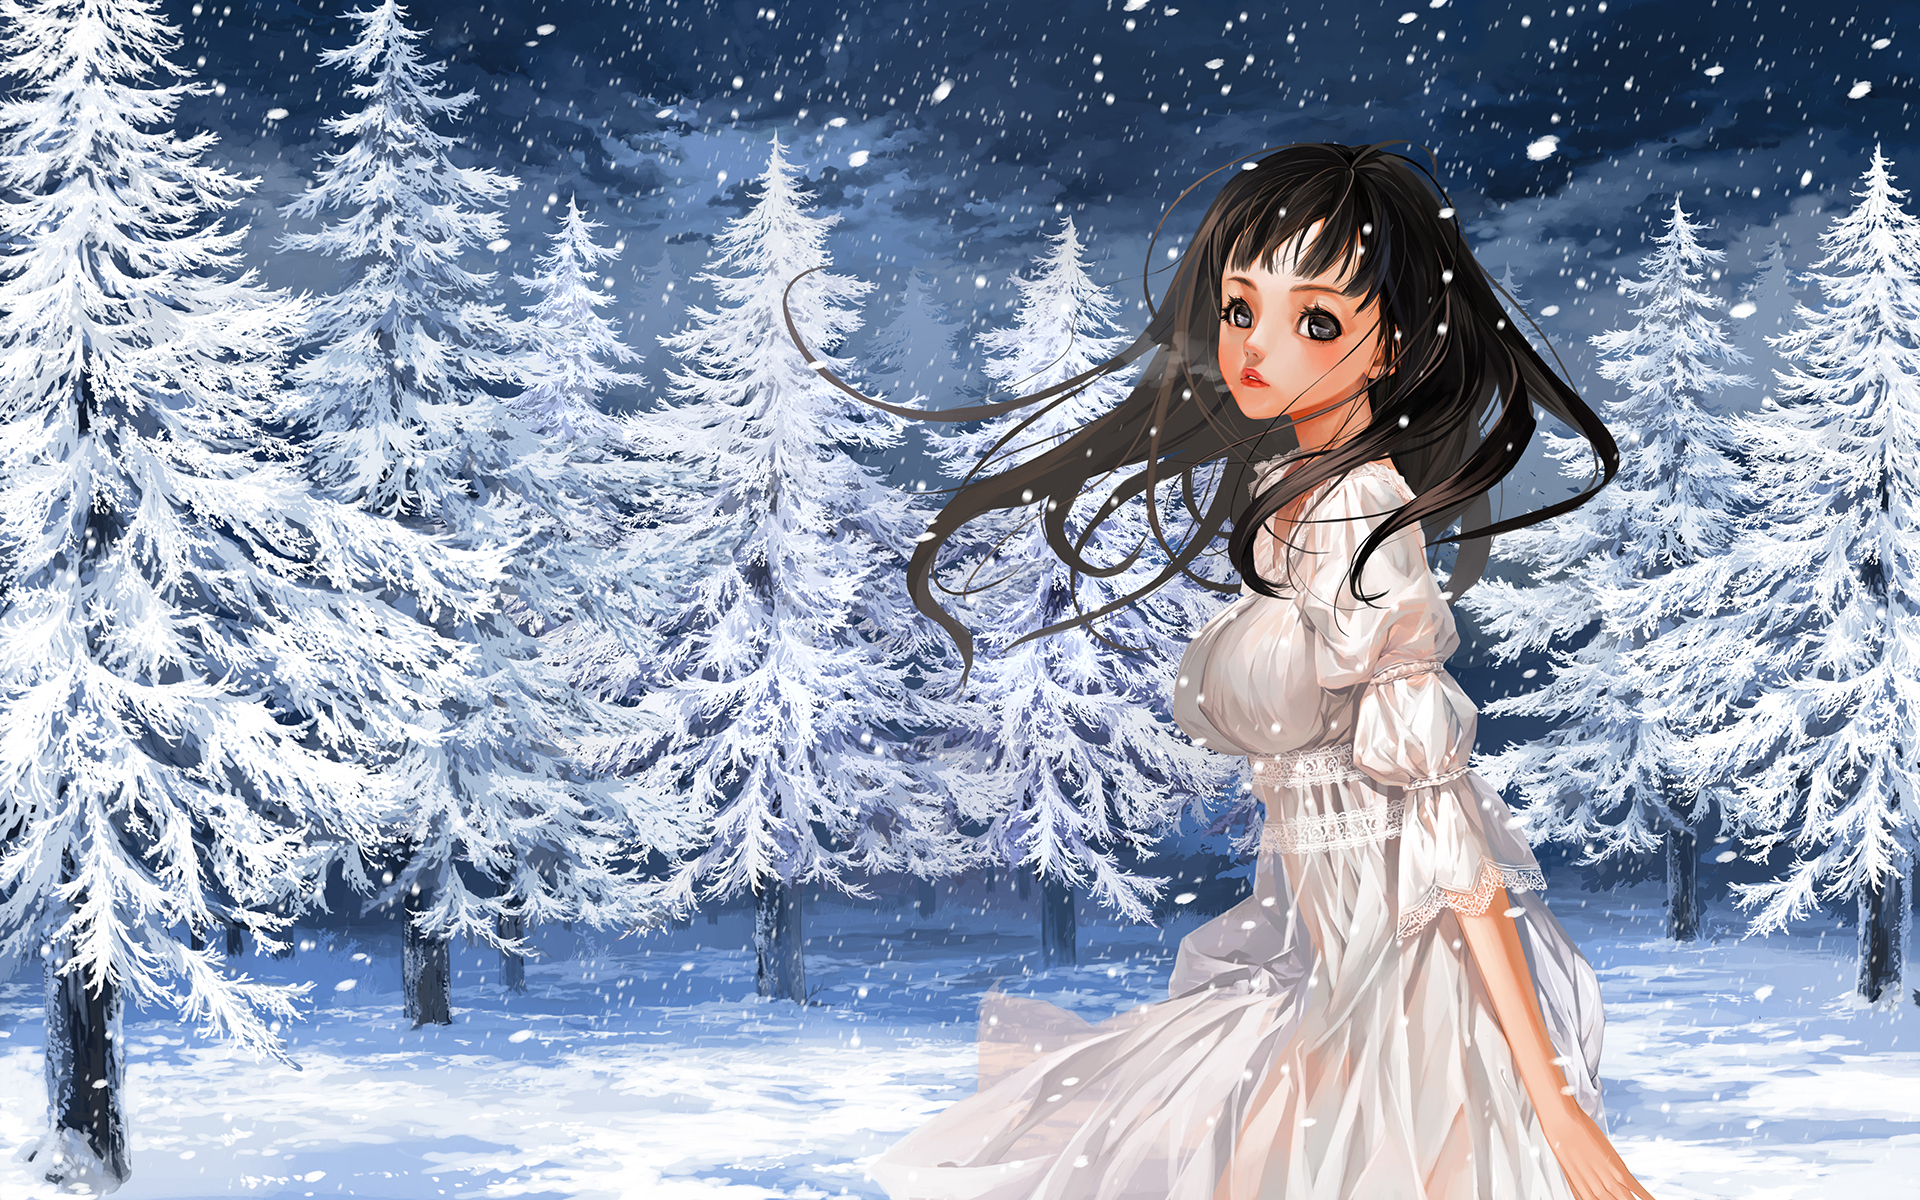 Girl and Snow Anime Wallpaper – Apps on Google Play